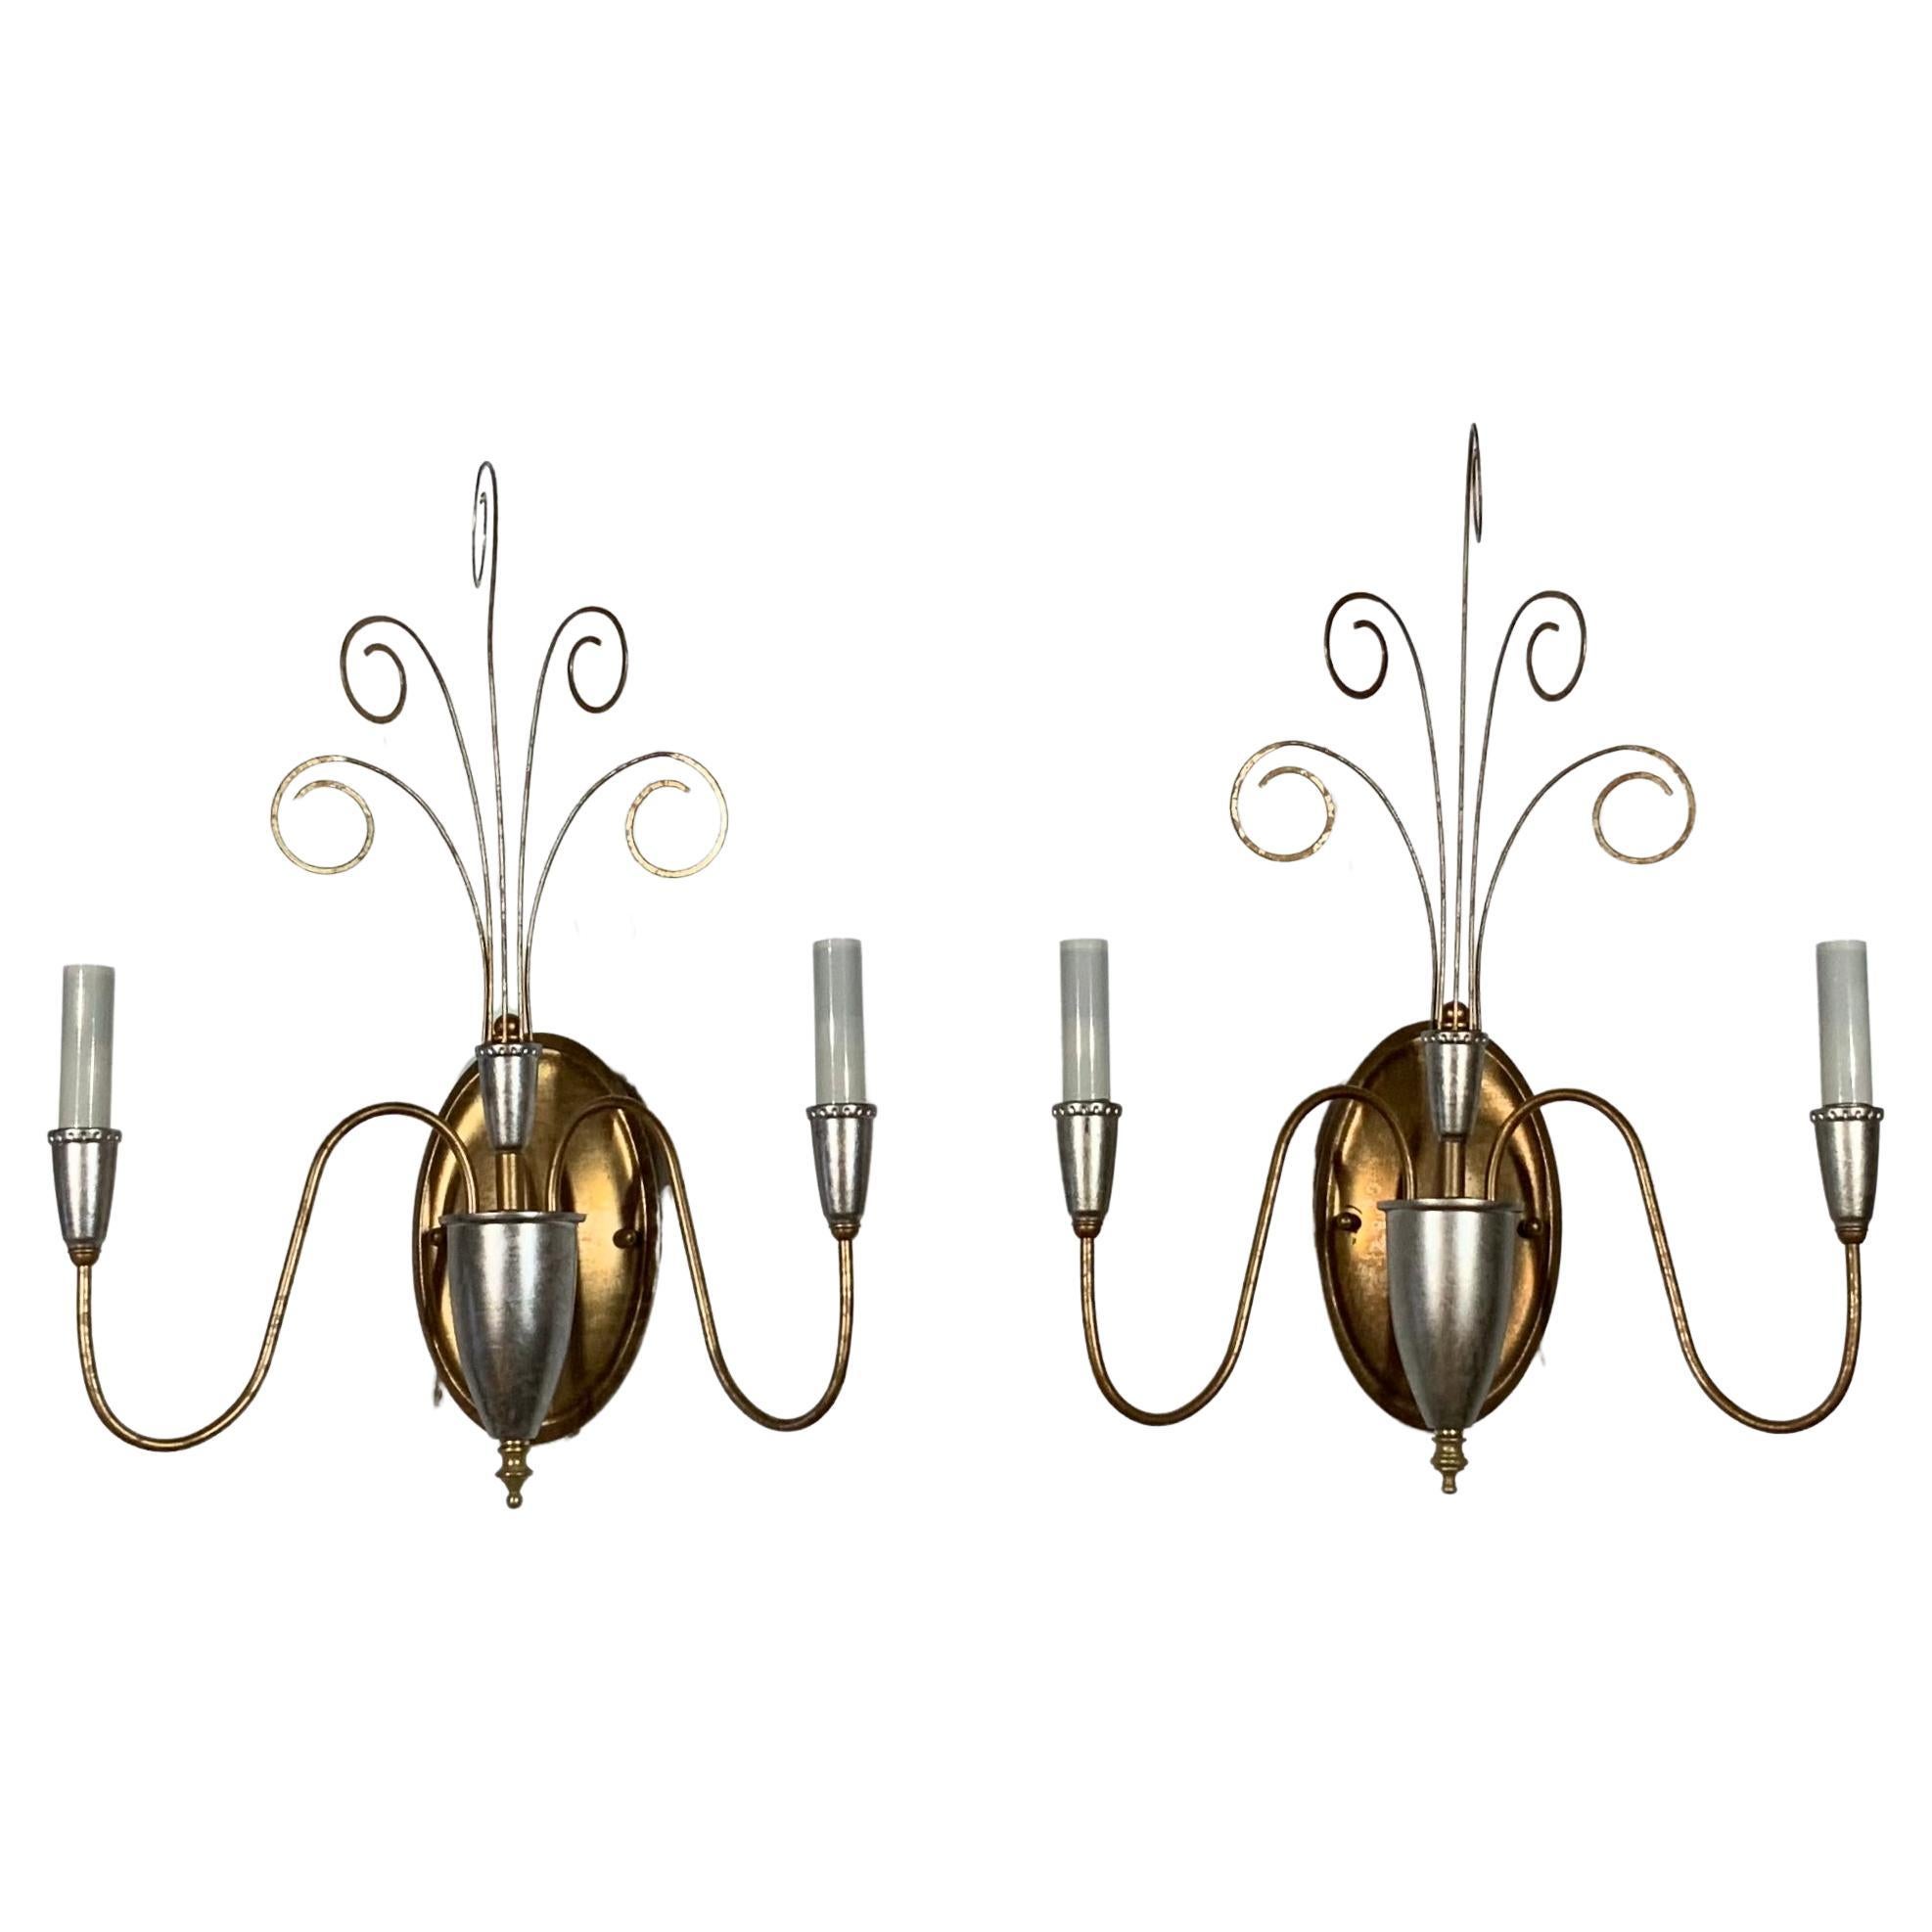 Pair of Neoclassic Style Wall Sconces